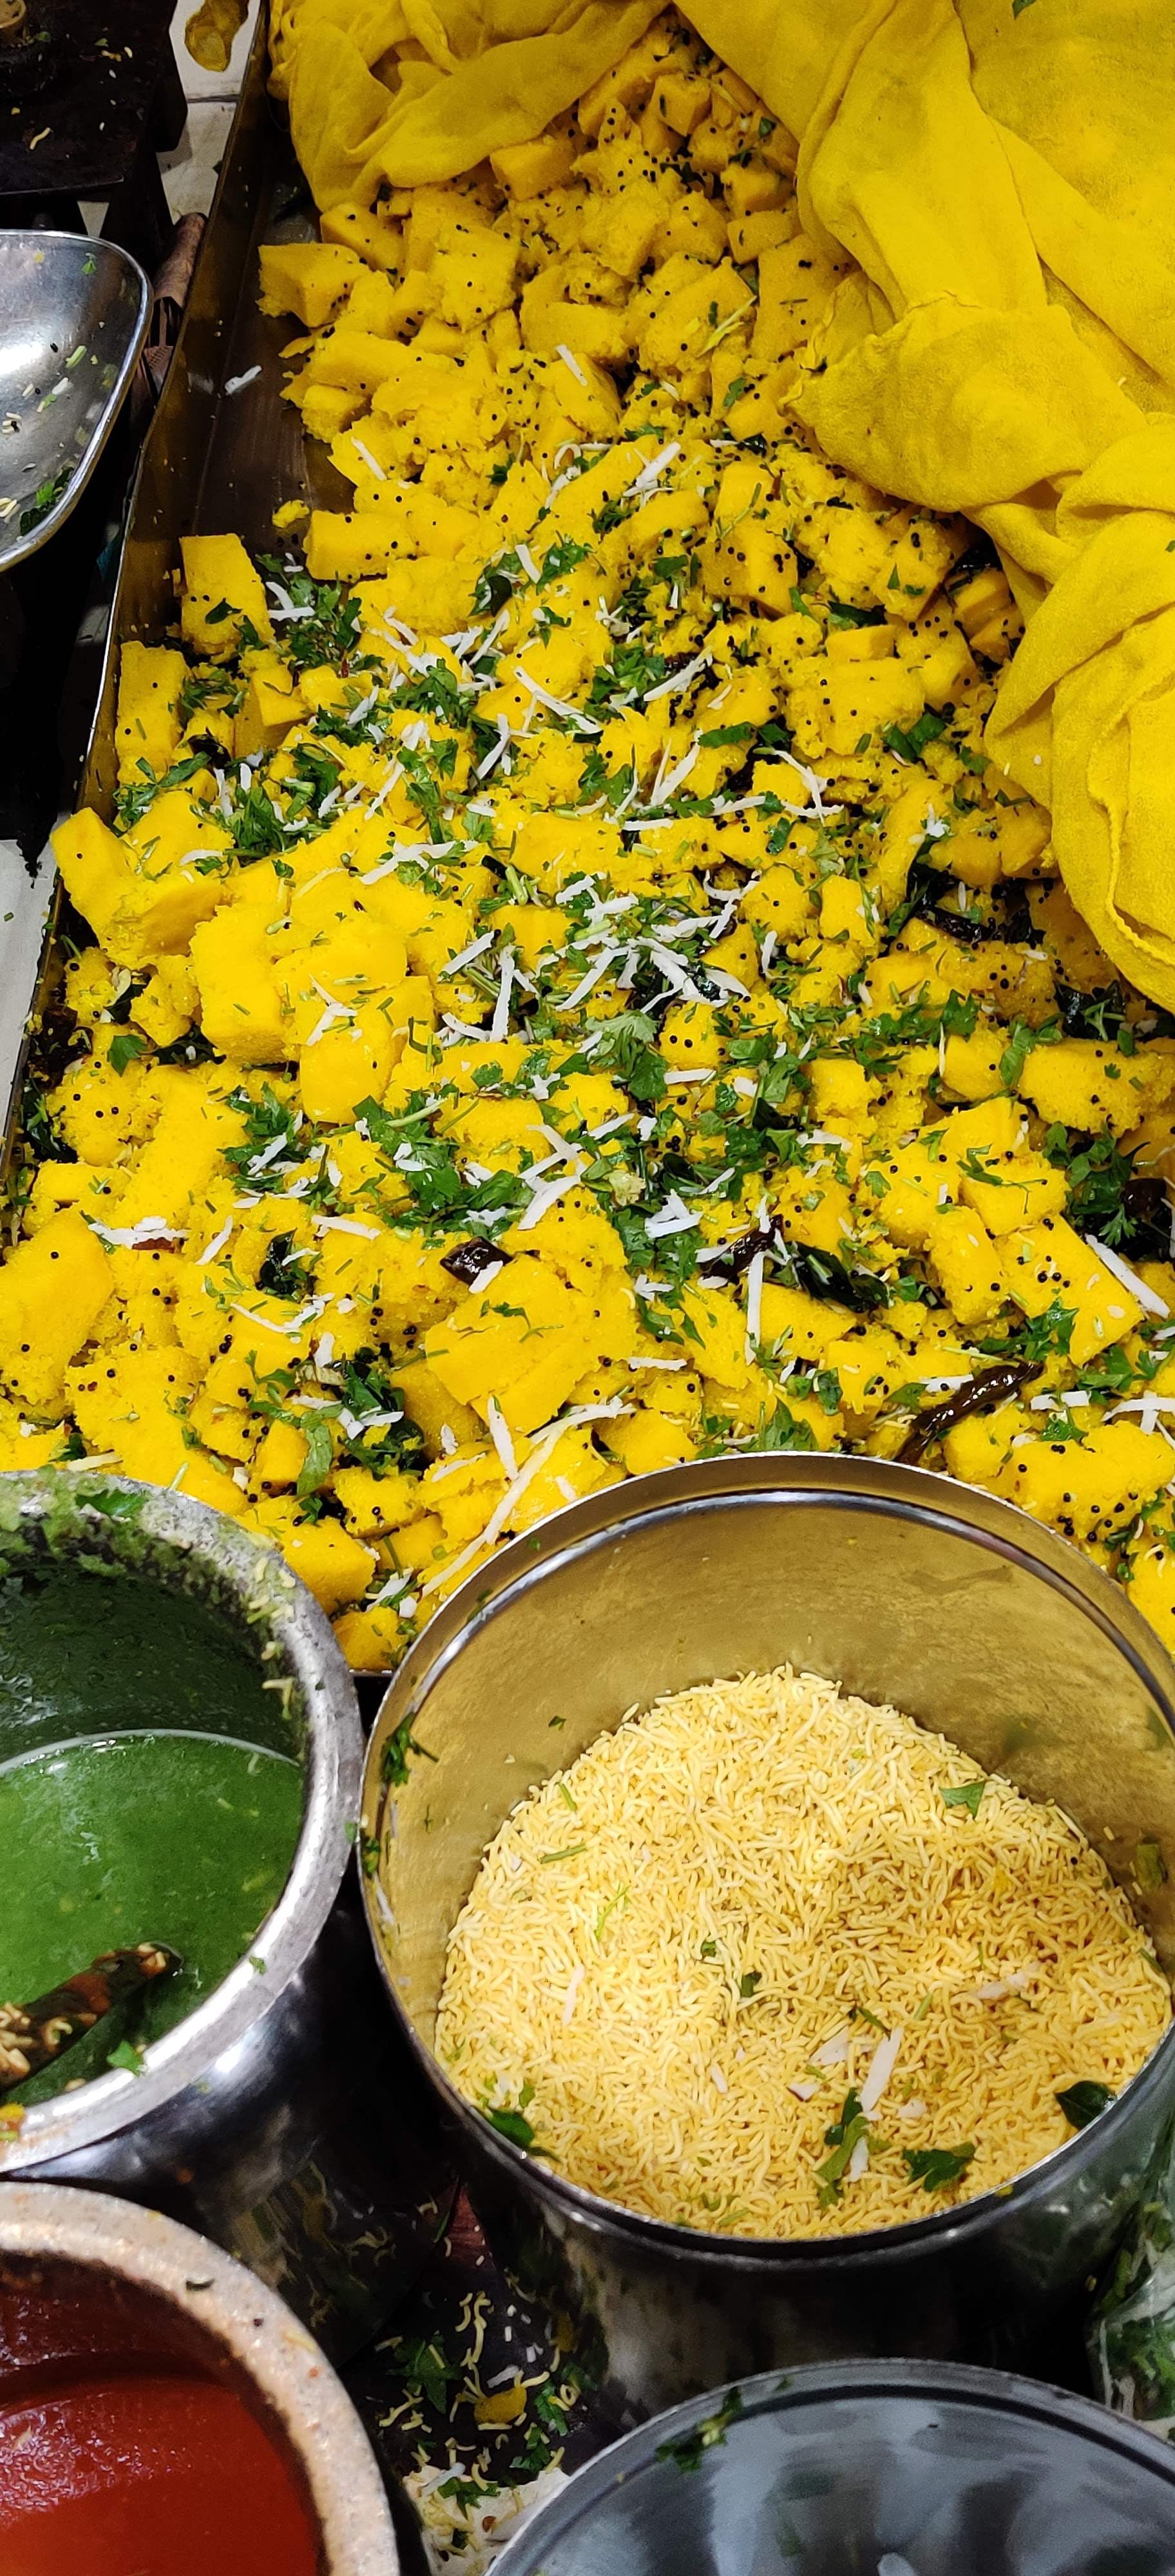 Yellow,Flower,Plant,Dish,Cuisine,Food,Ingredient,Perennial plant,Indian cuisine,Mimosa